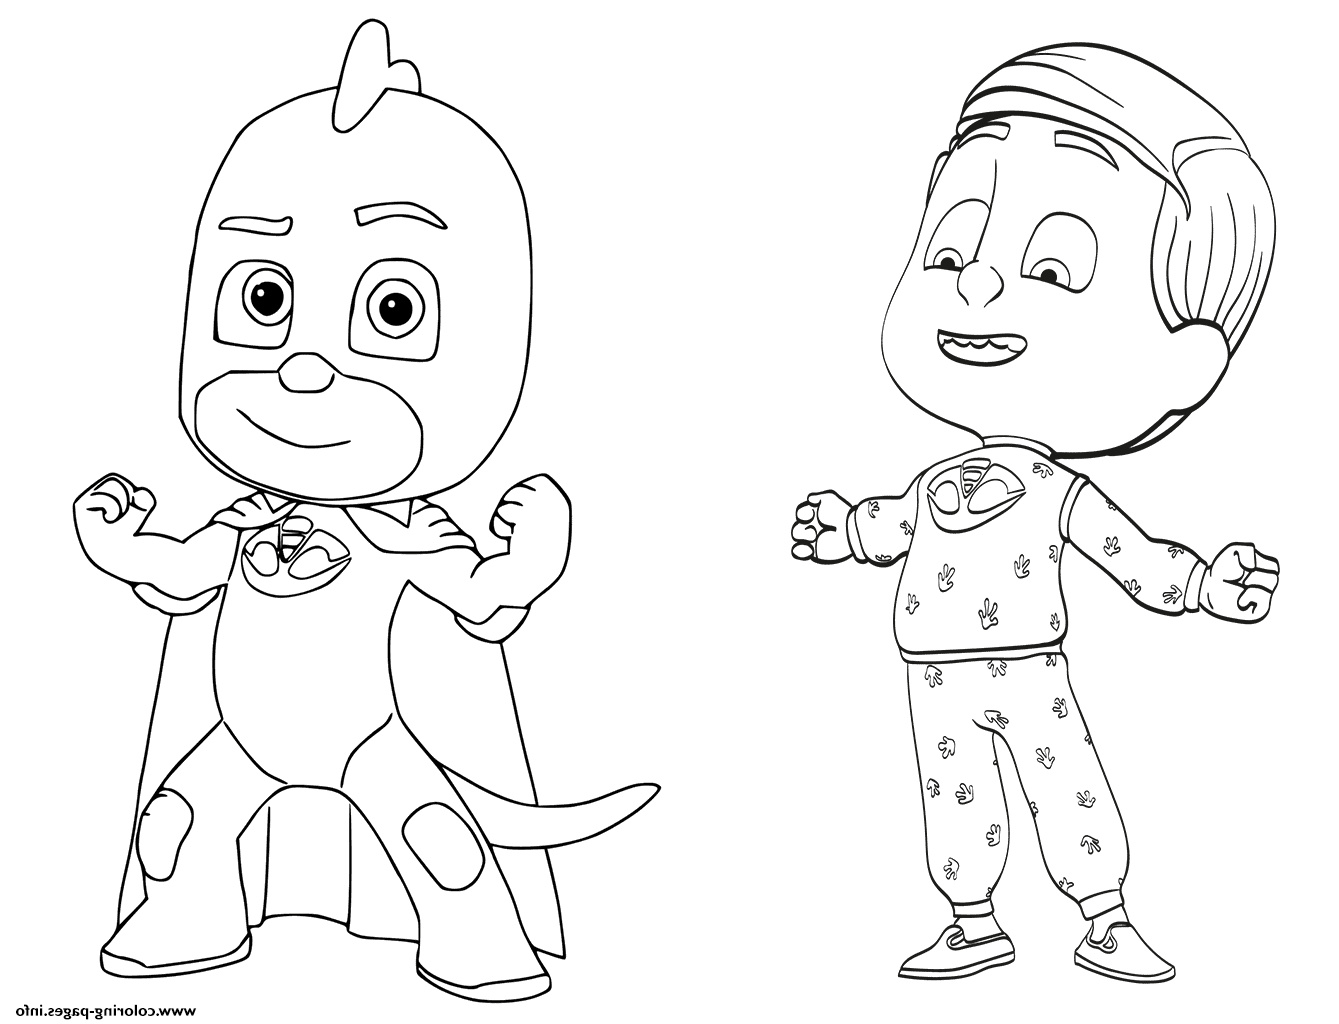 greg is gekko from pj masks printable coloring pages book